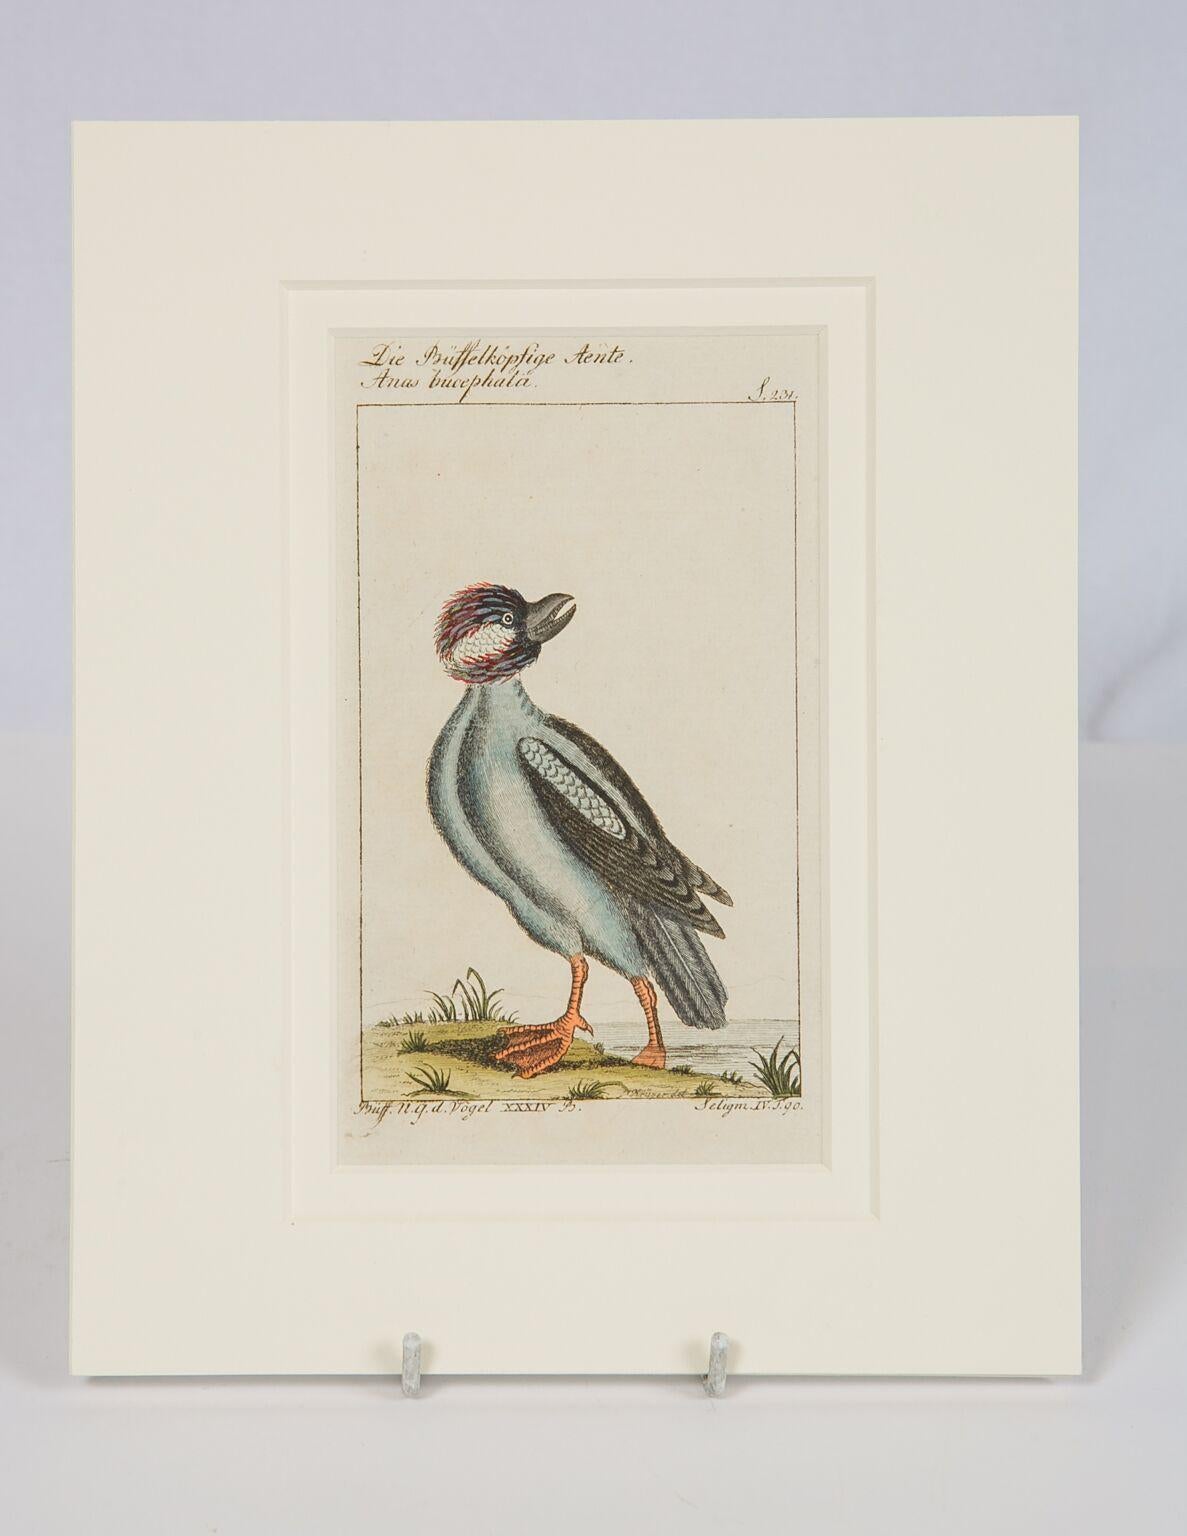 We are pleased to offer these Individual bird scenes captured on paper in the style of the Audubon bird engravings.
These small, gem like, hand-colored engravings represent the rare and compelling ornithological drawings of the influential